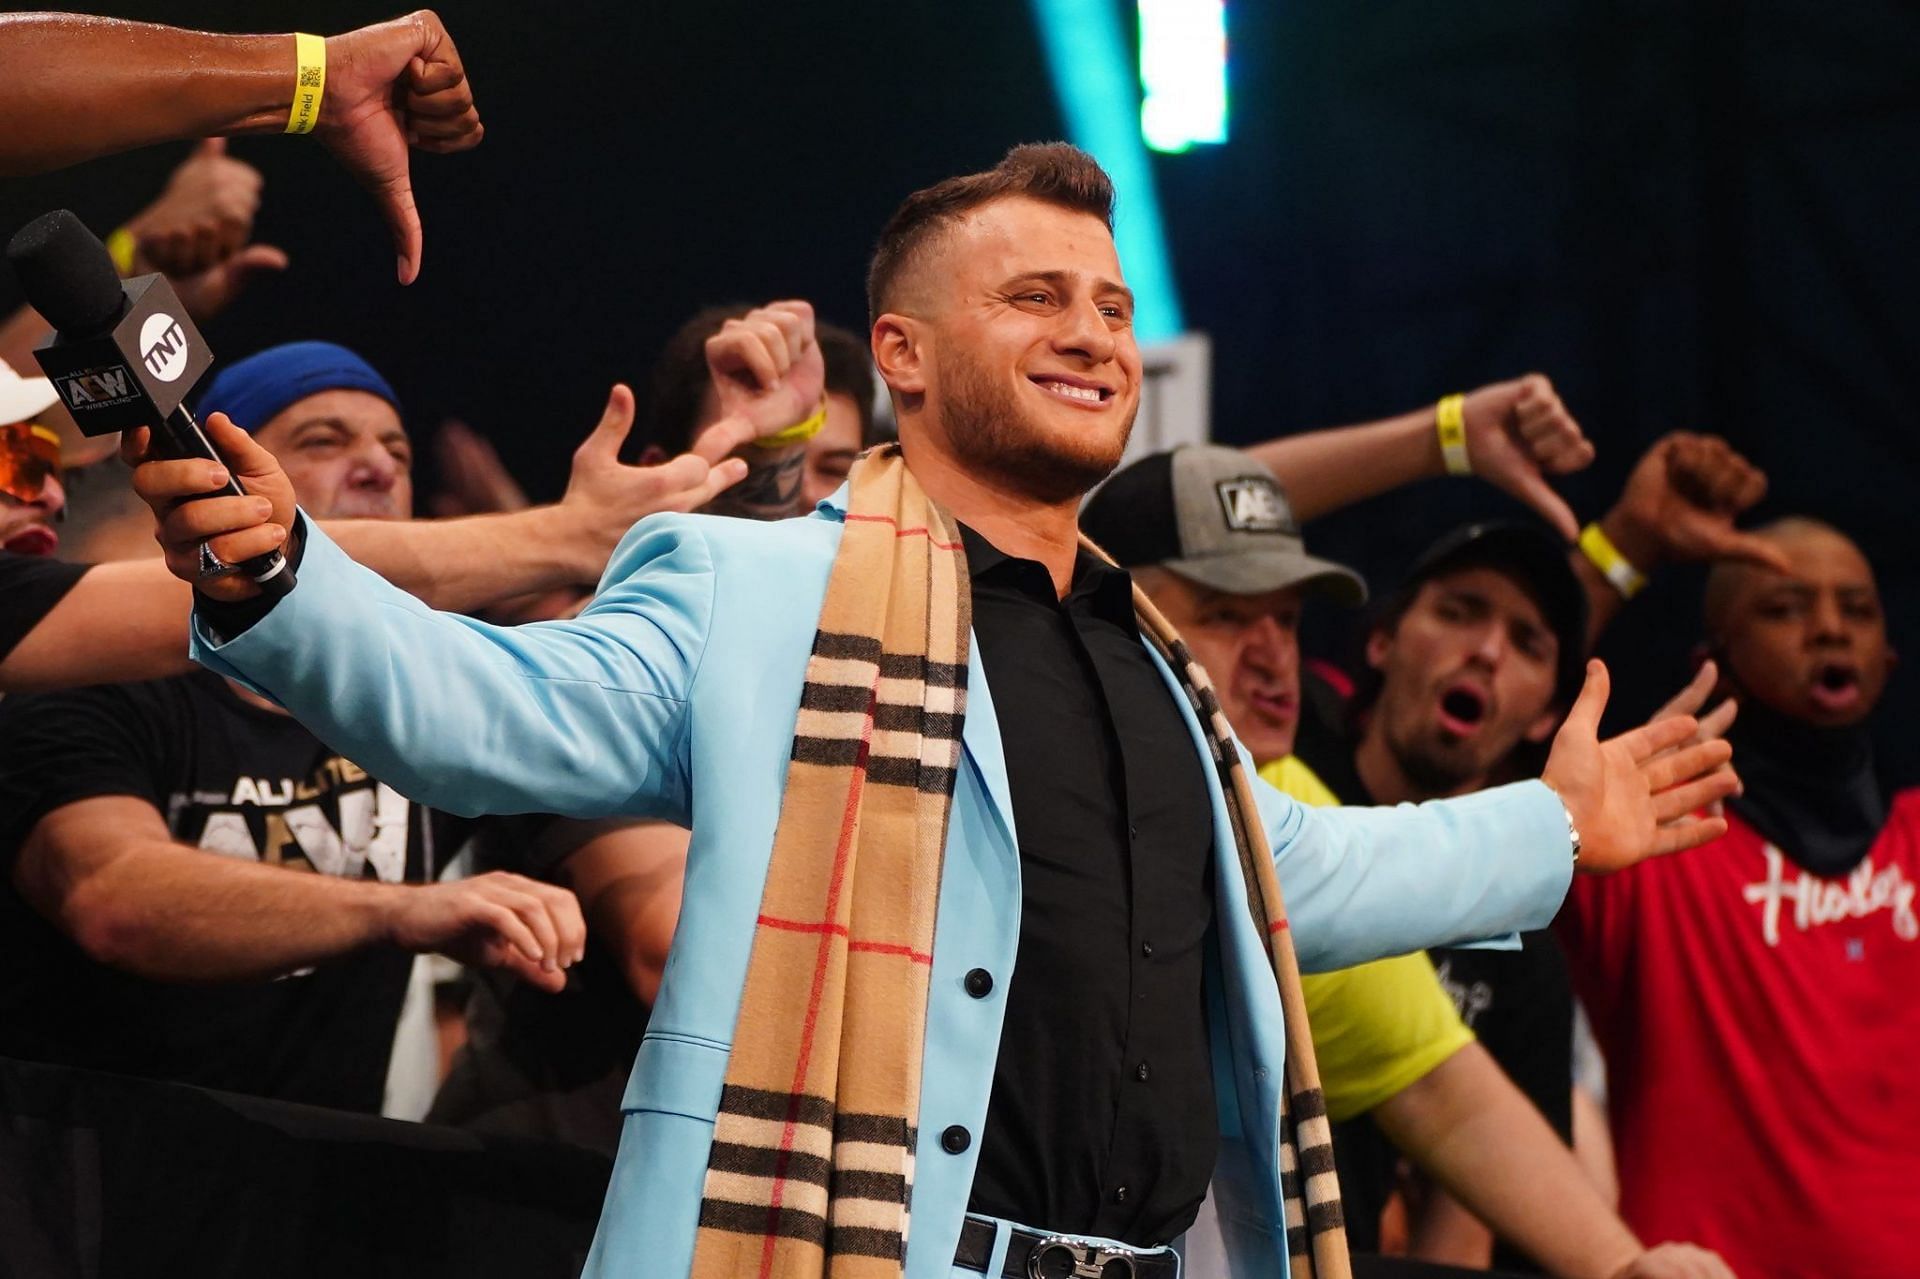 AEW star MJF is one of the best heels that AEW has on their roster